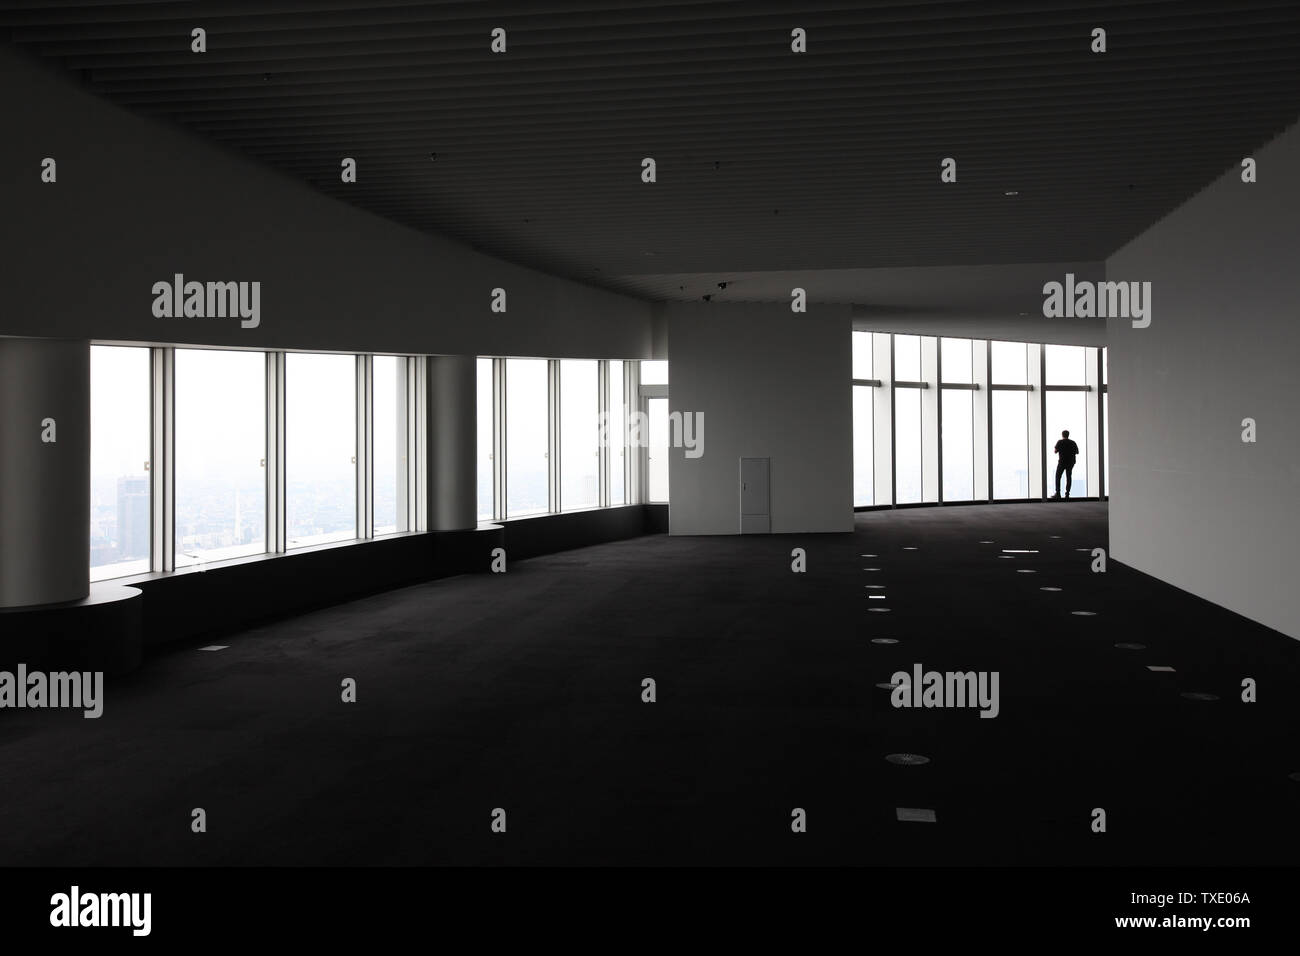 Silhouette of man on a background of a window in an empty room highrise building. Stock Photo